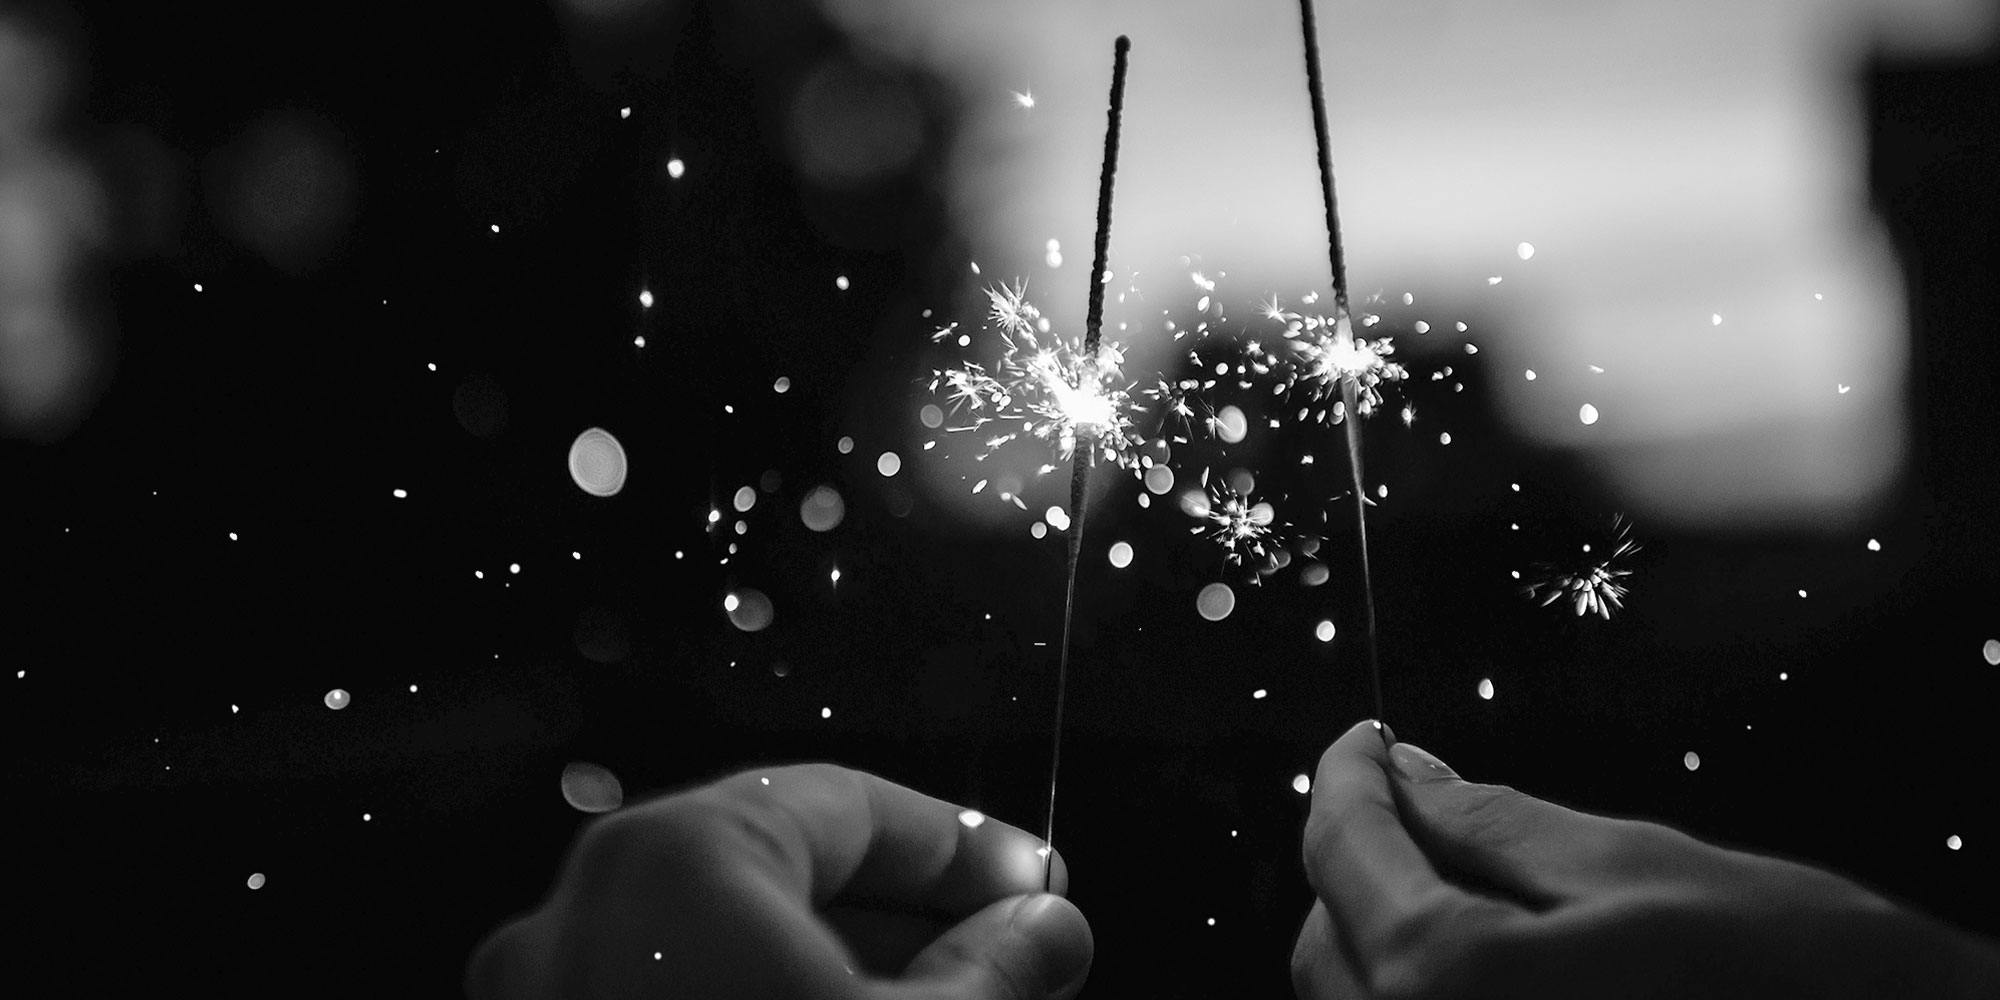 Two hands holding sparklers